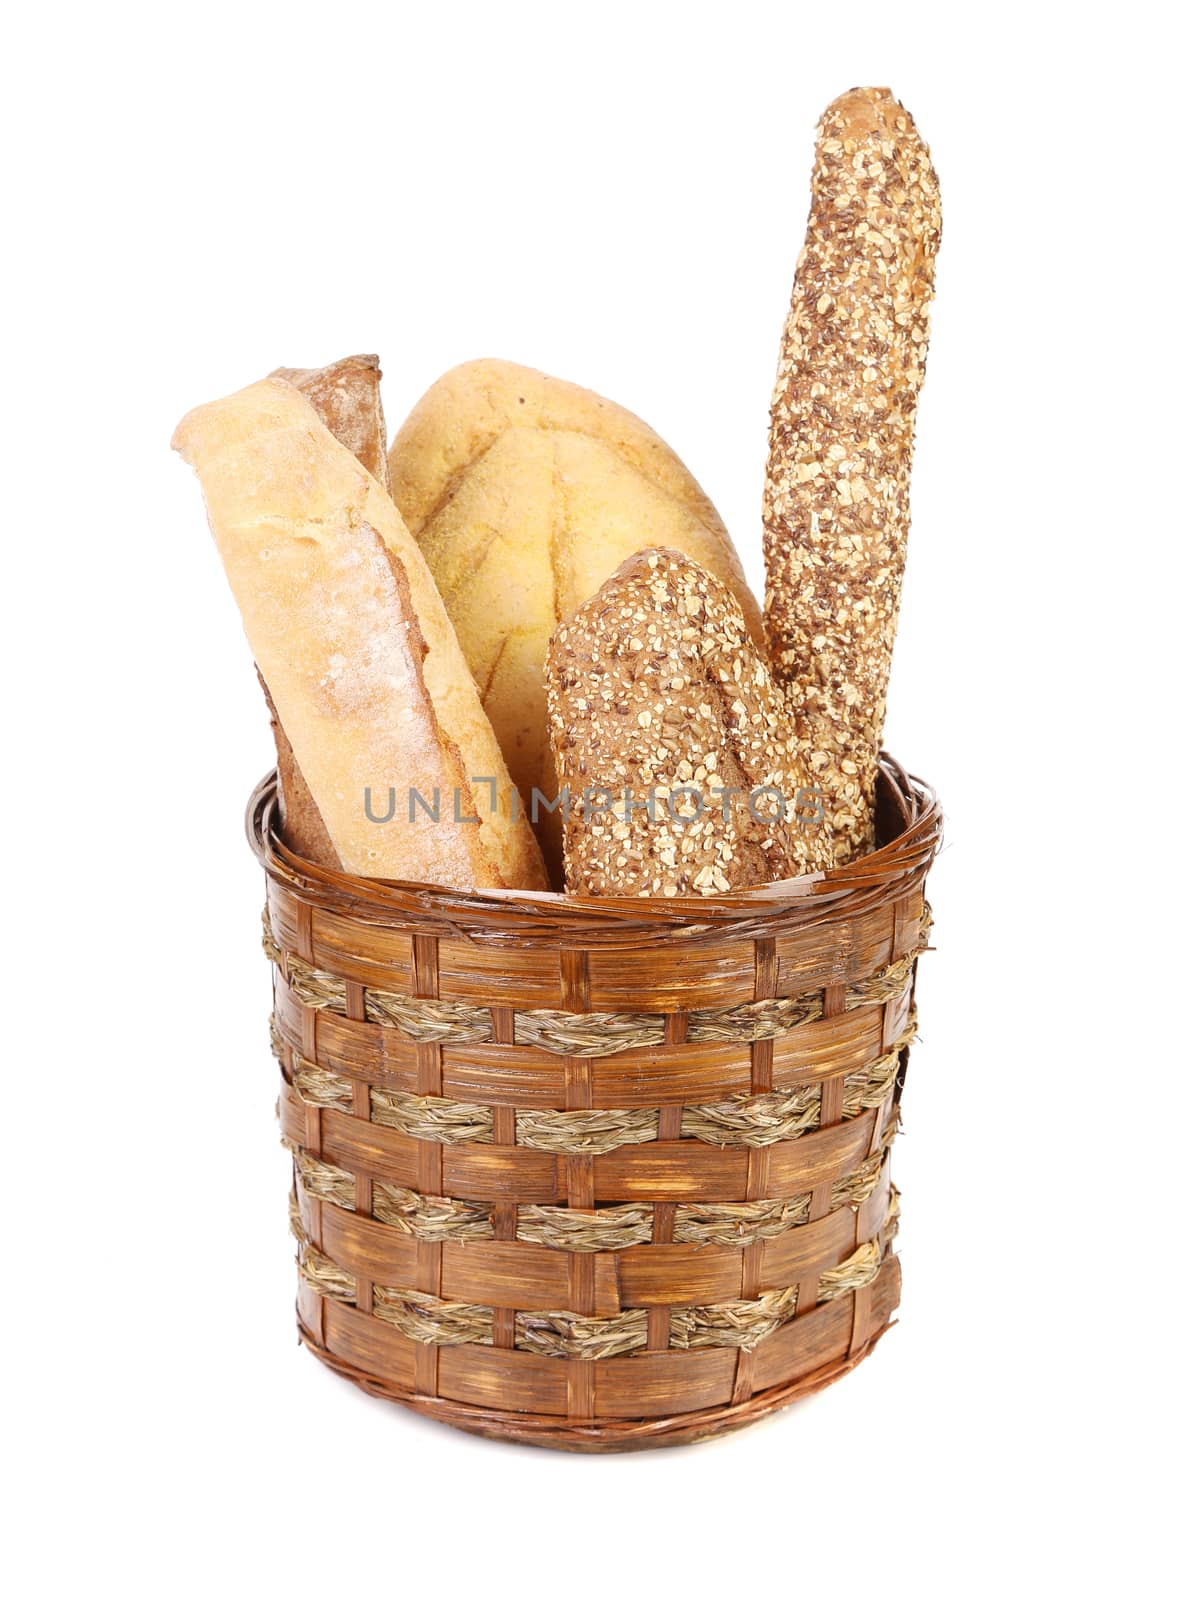 Composition with bread and rolls. Isolated on a white background.